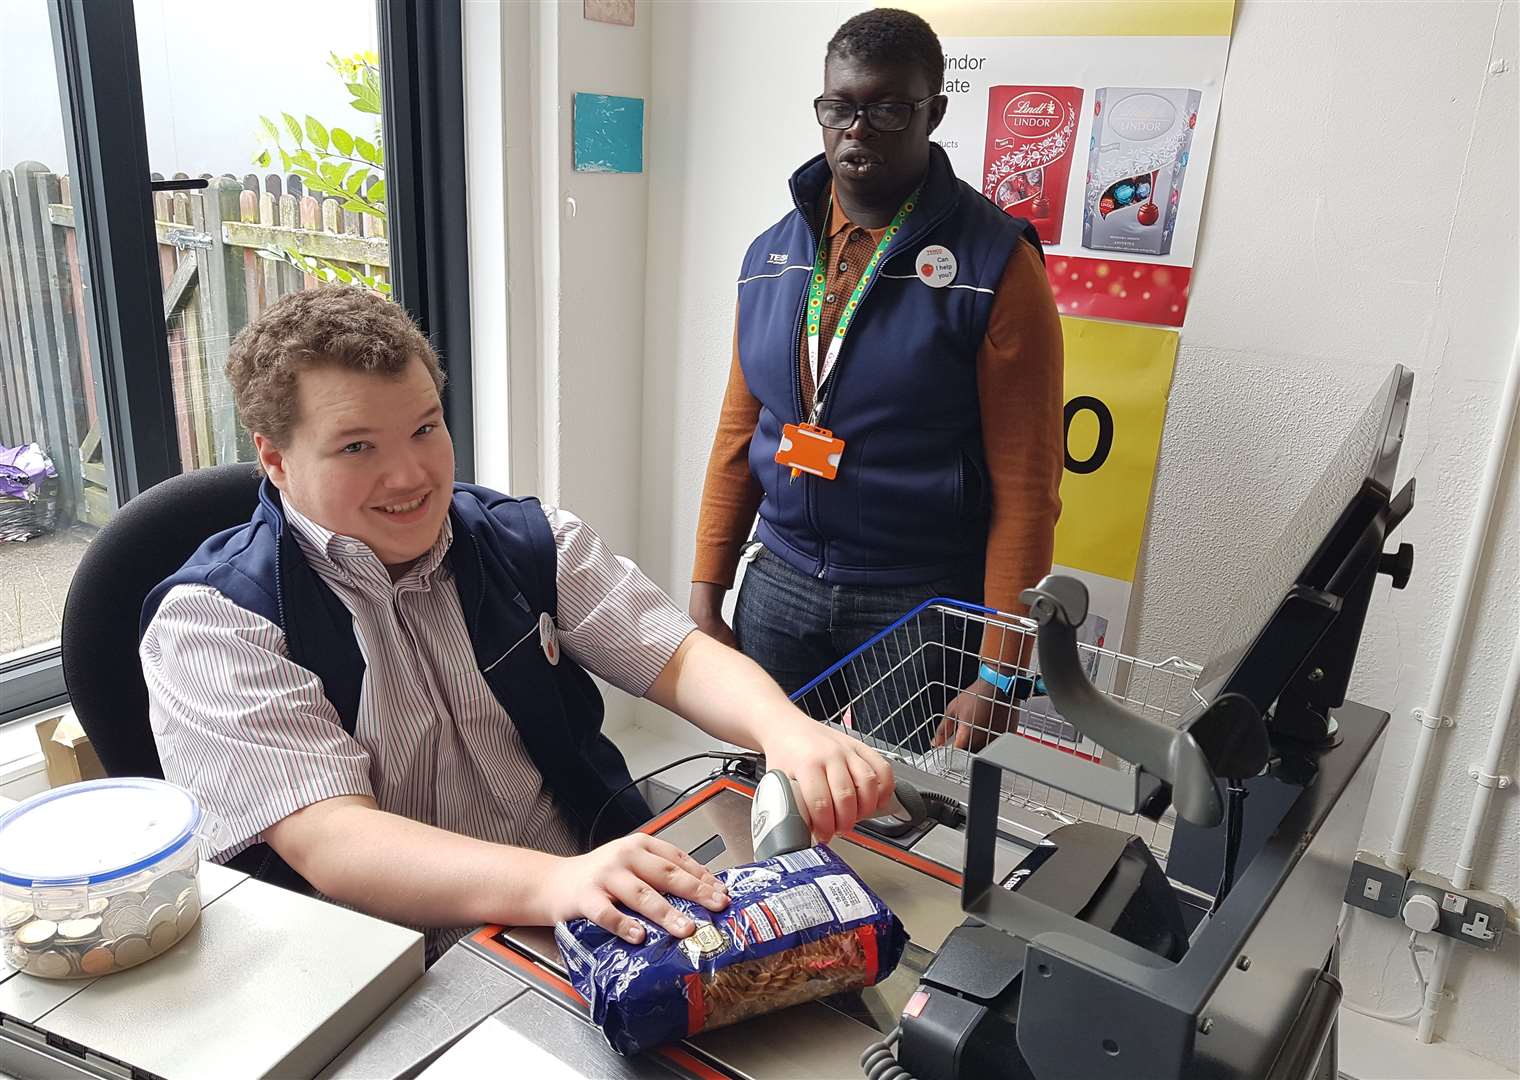 Daniel and Taio work in the new Tesco store